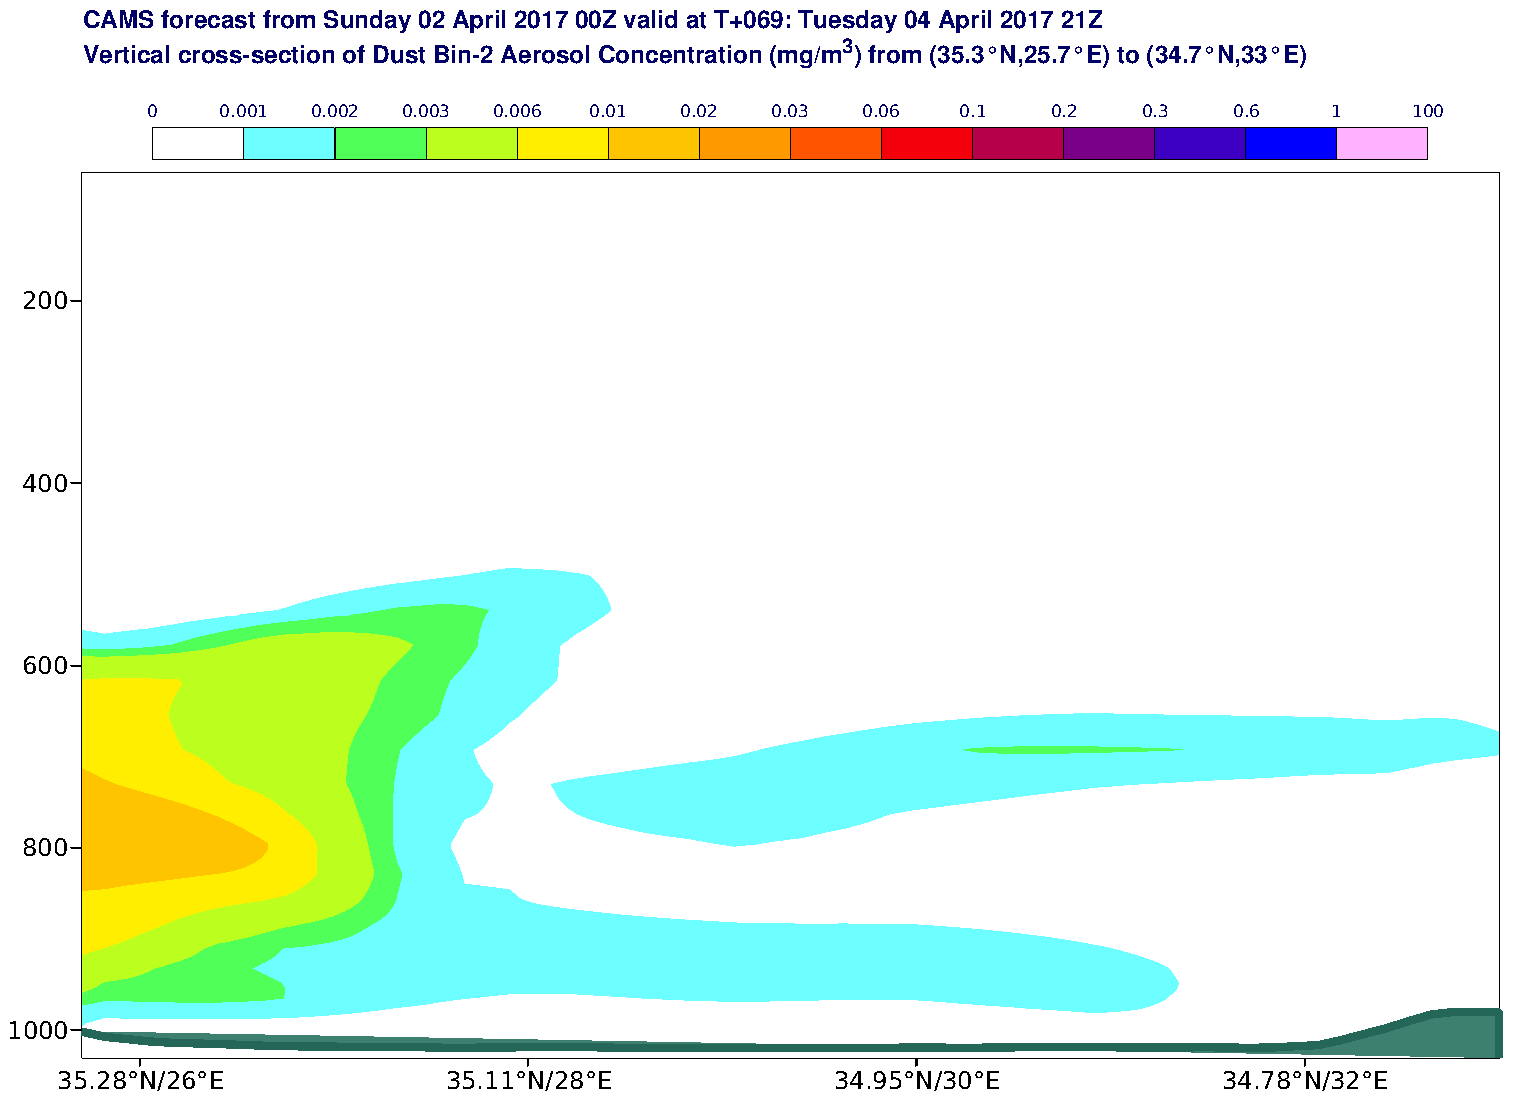 Vertical cross-section of Dust Bin-2 Aerosol Concentration (mg/m3) valid at T69 - 2017-04-04 21:00